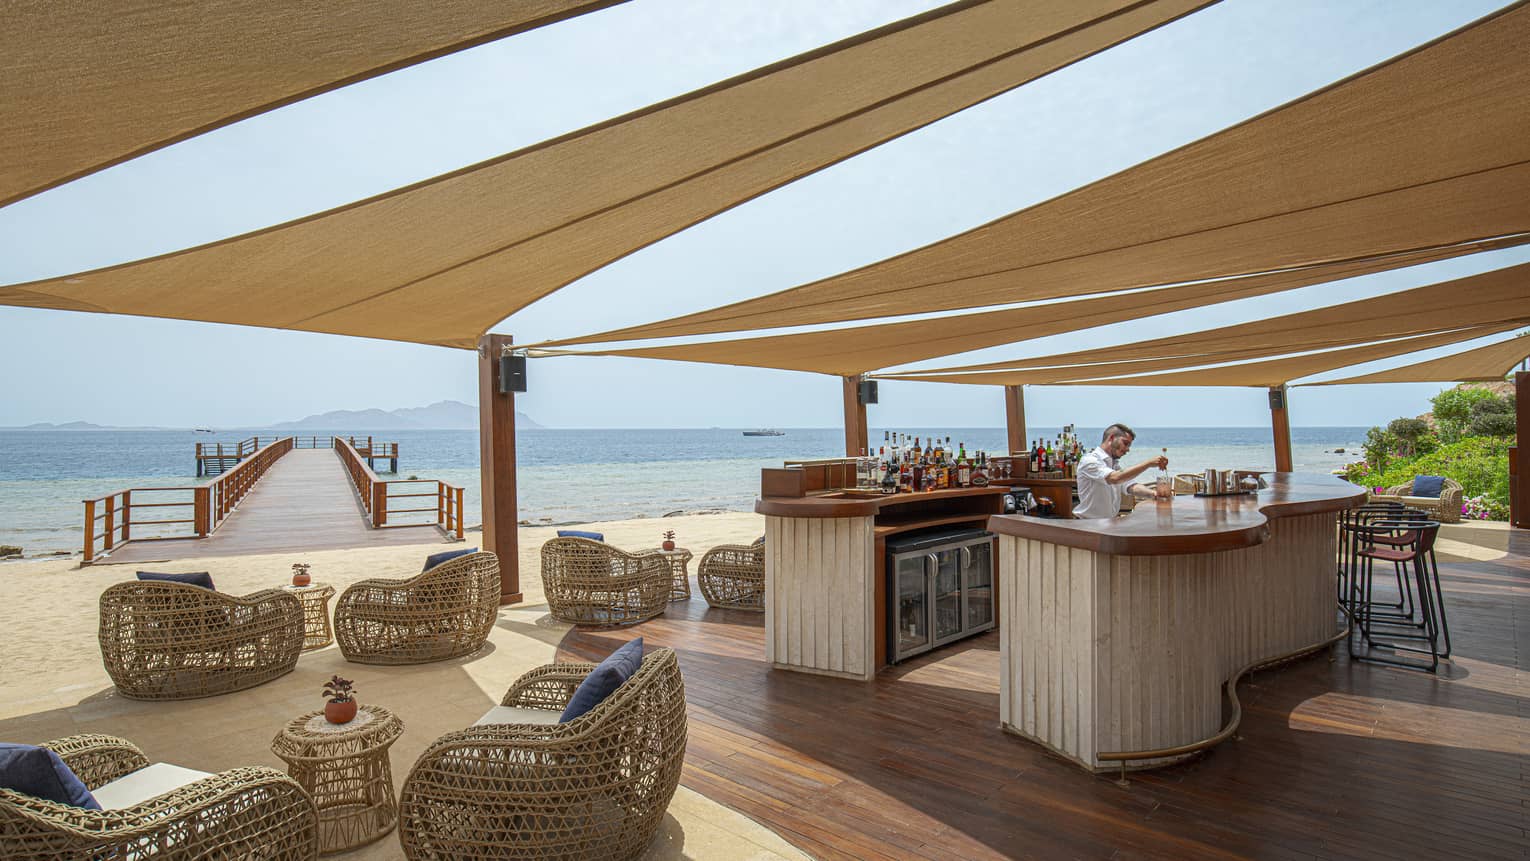 Bartender mixes drink at Breeze Bar, shaded by strips of fabric, rattan arm chairs, view of the Red Sea